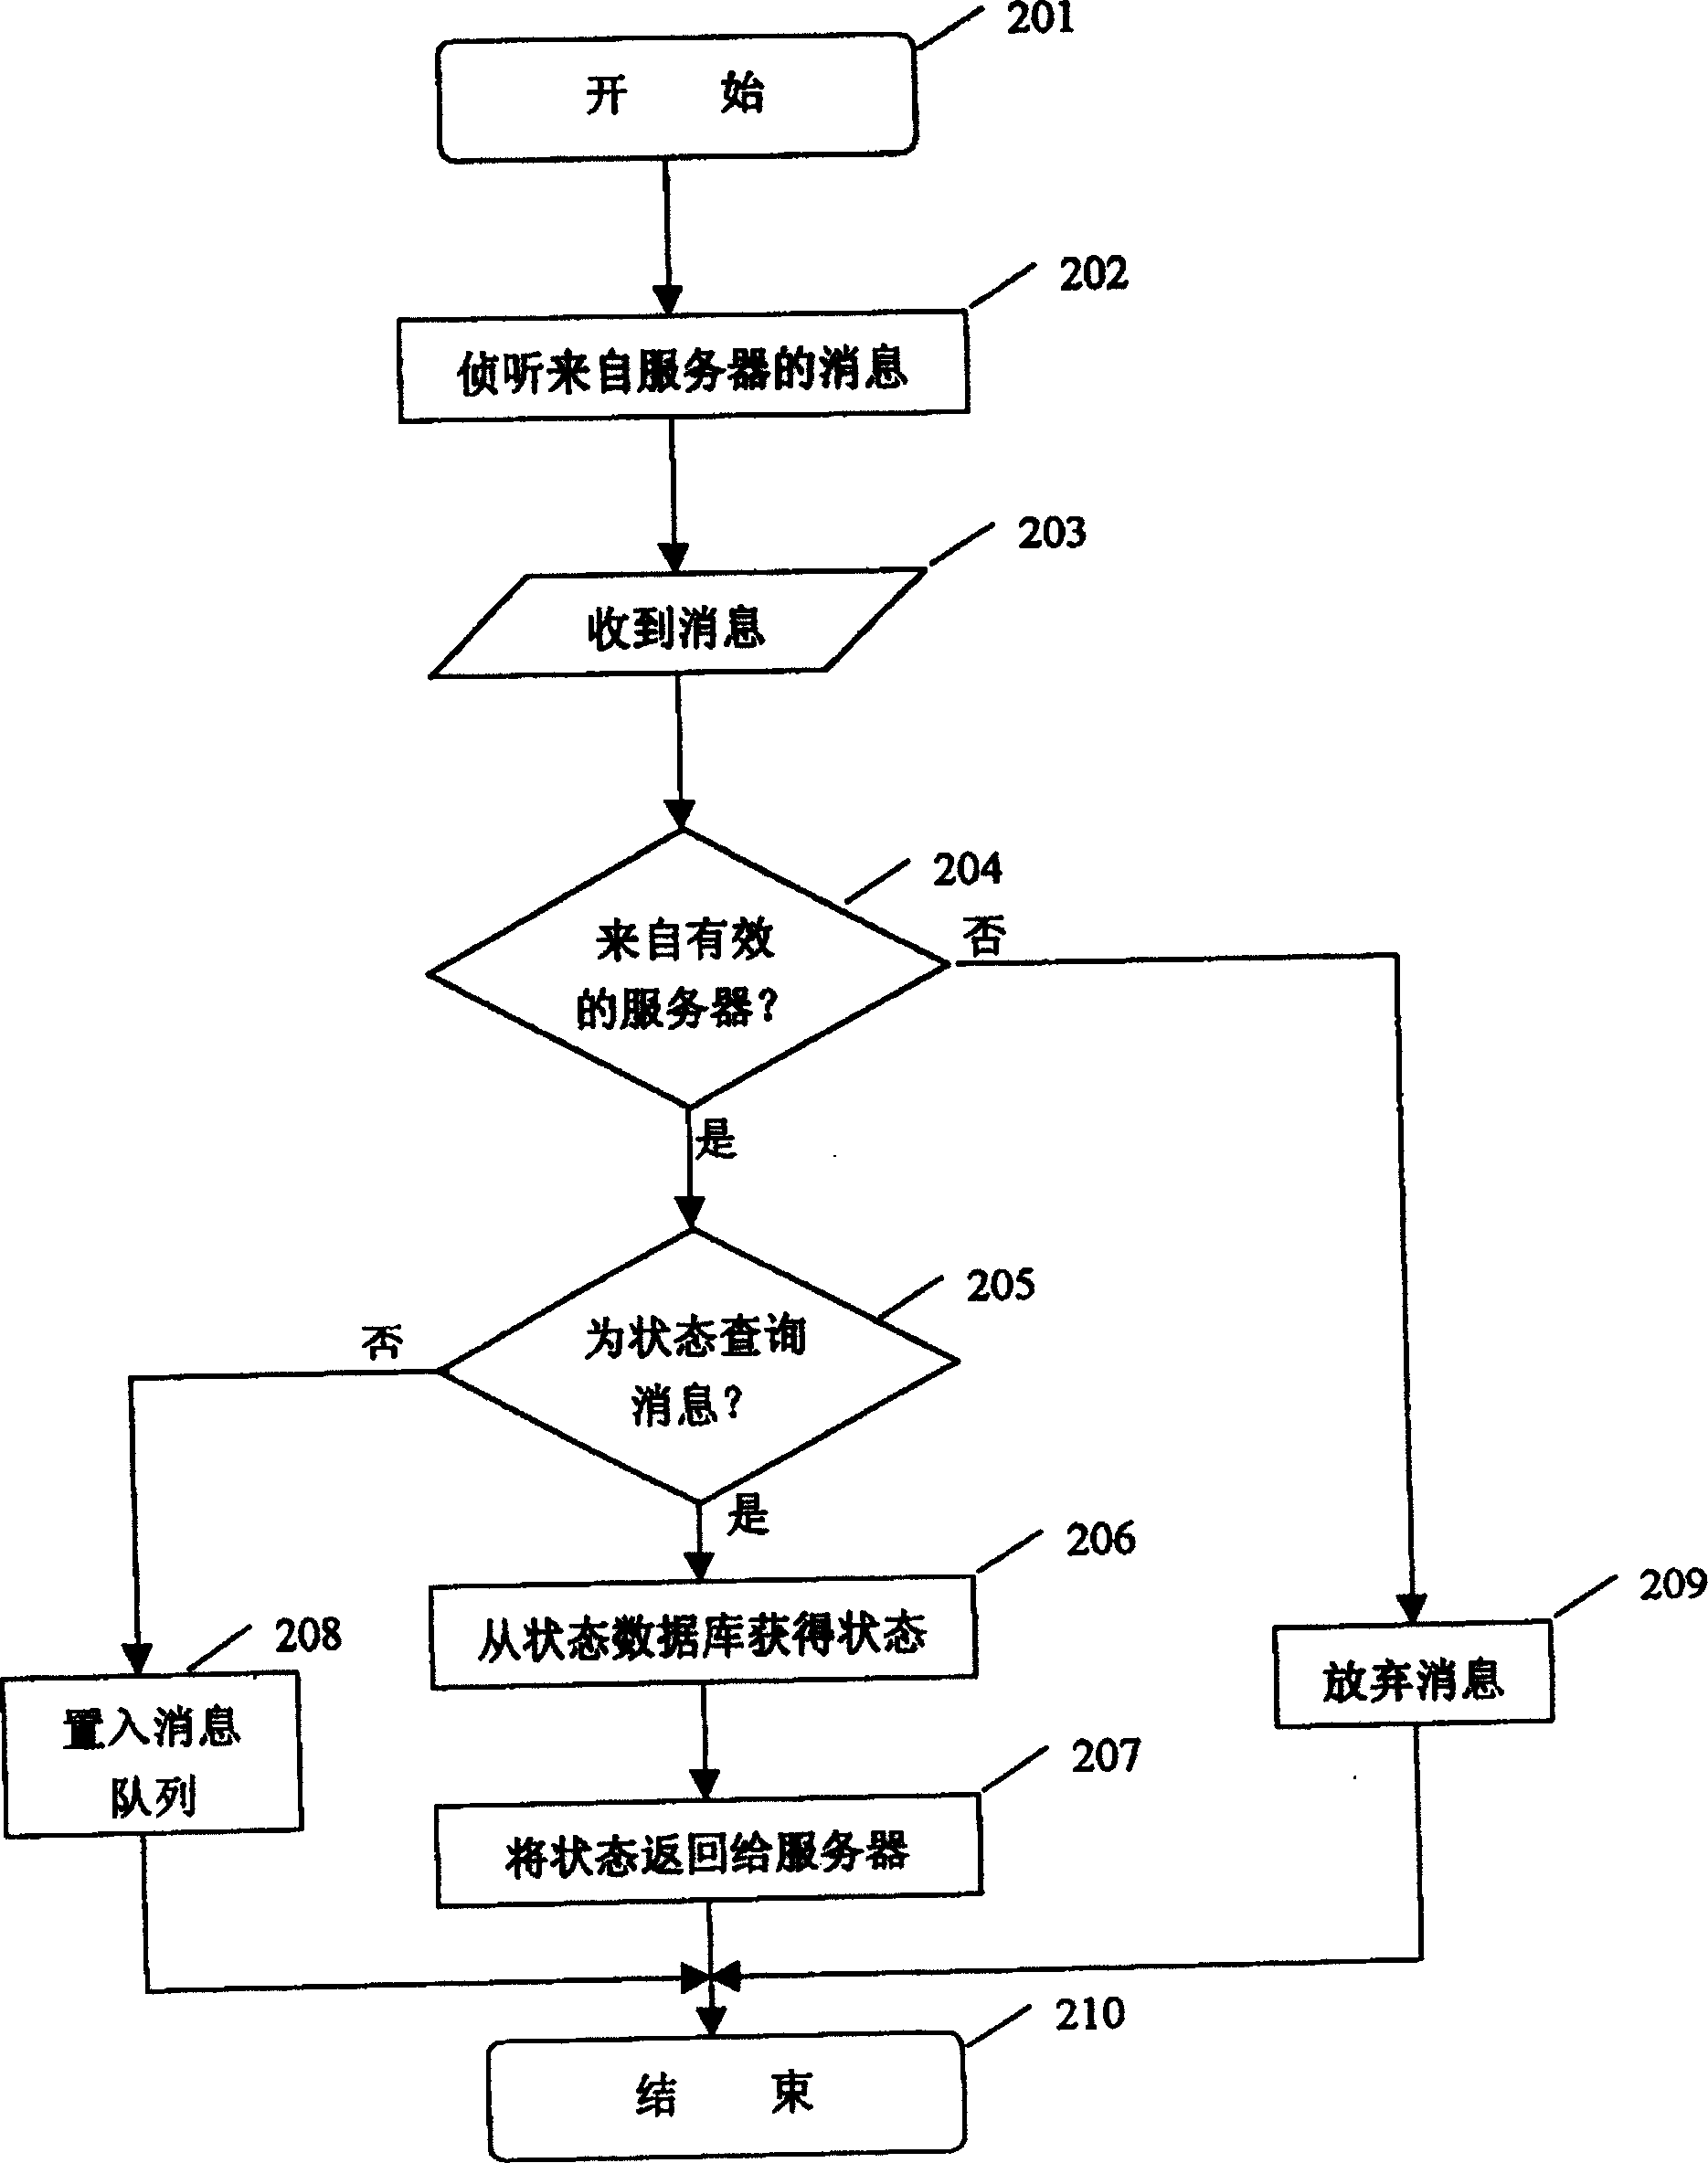 Short message gateway, system and method for providing mobile phone with information service